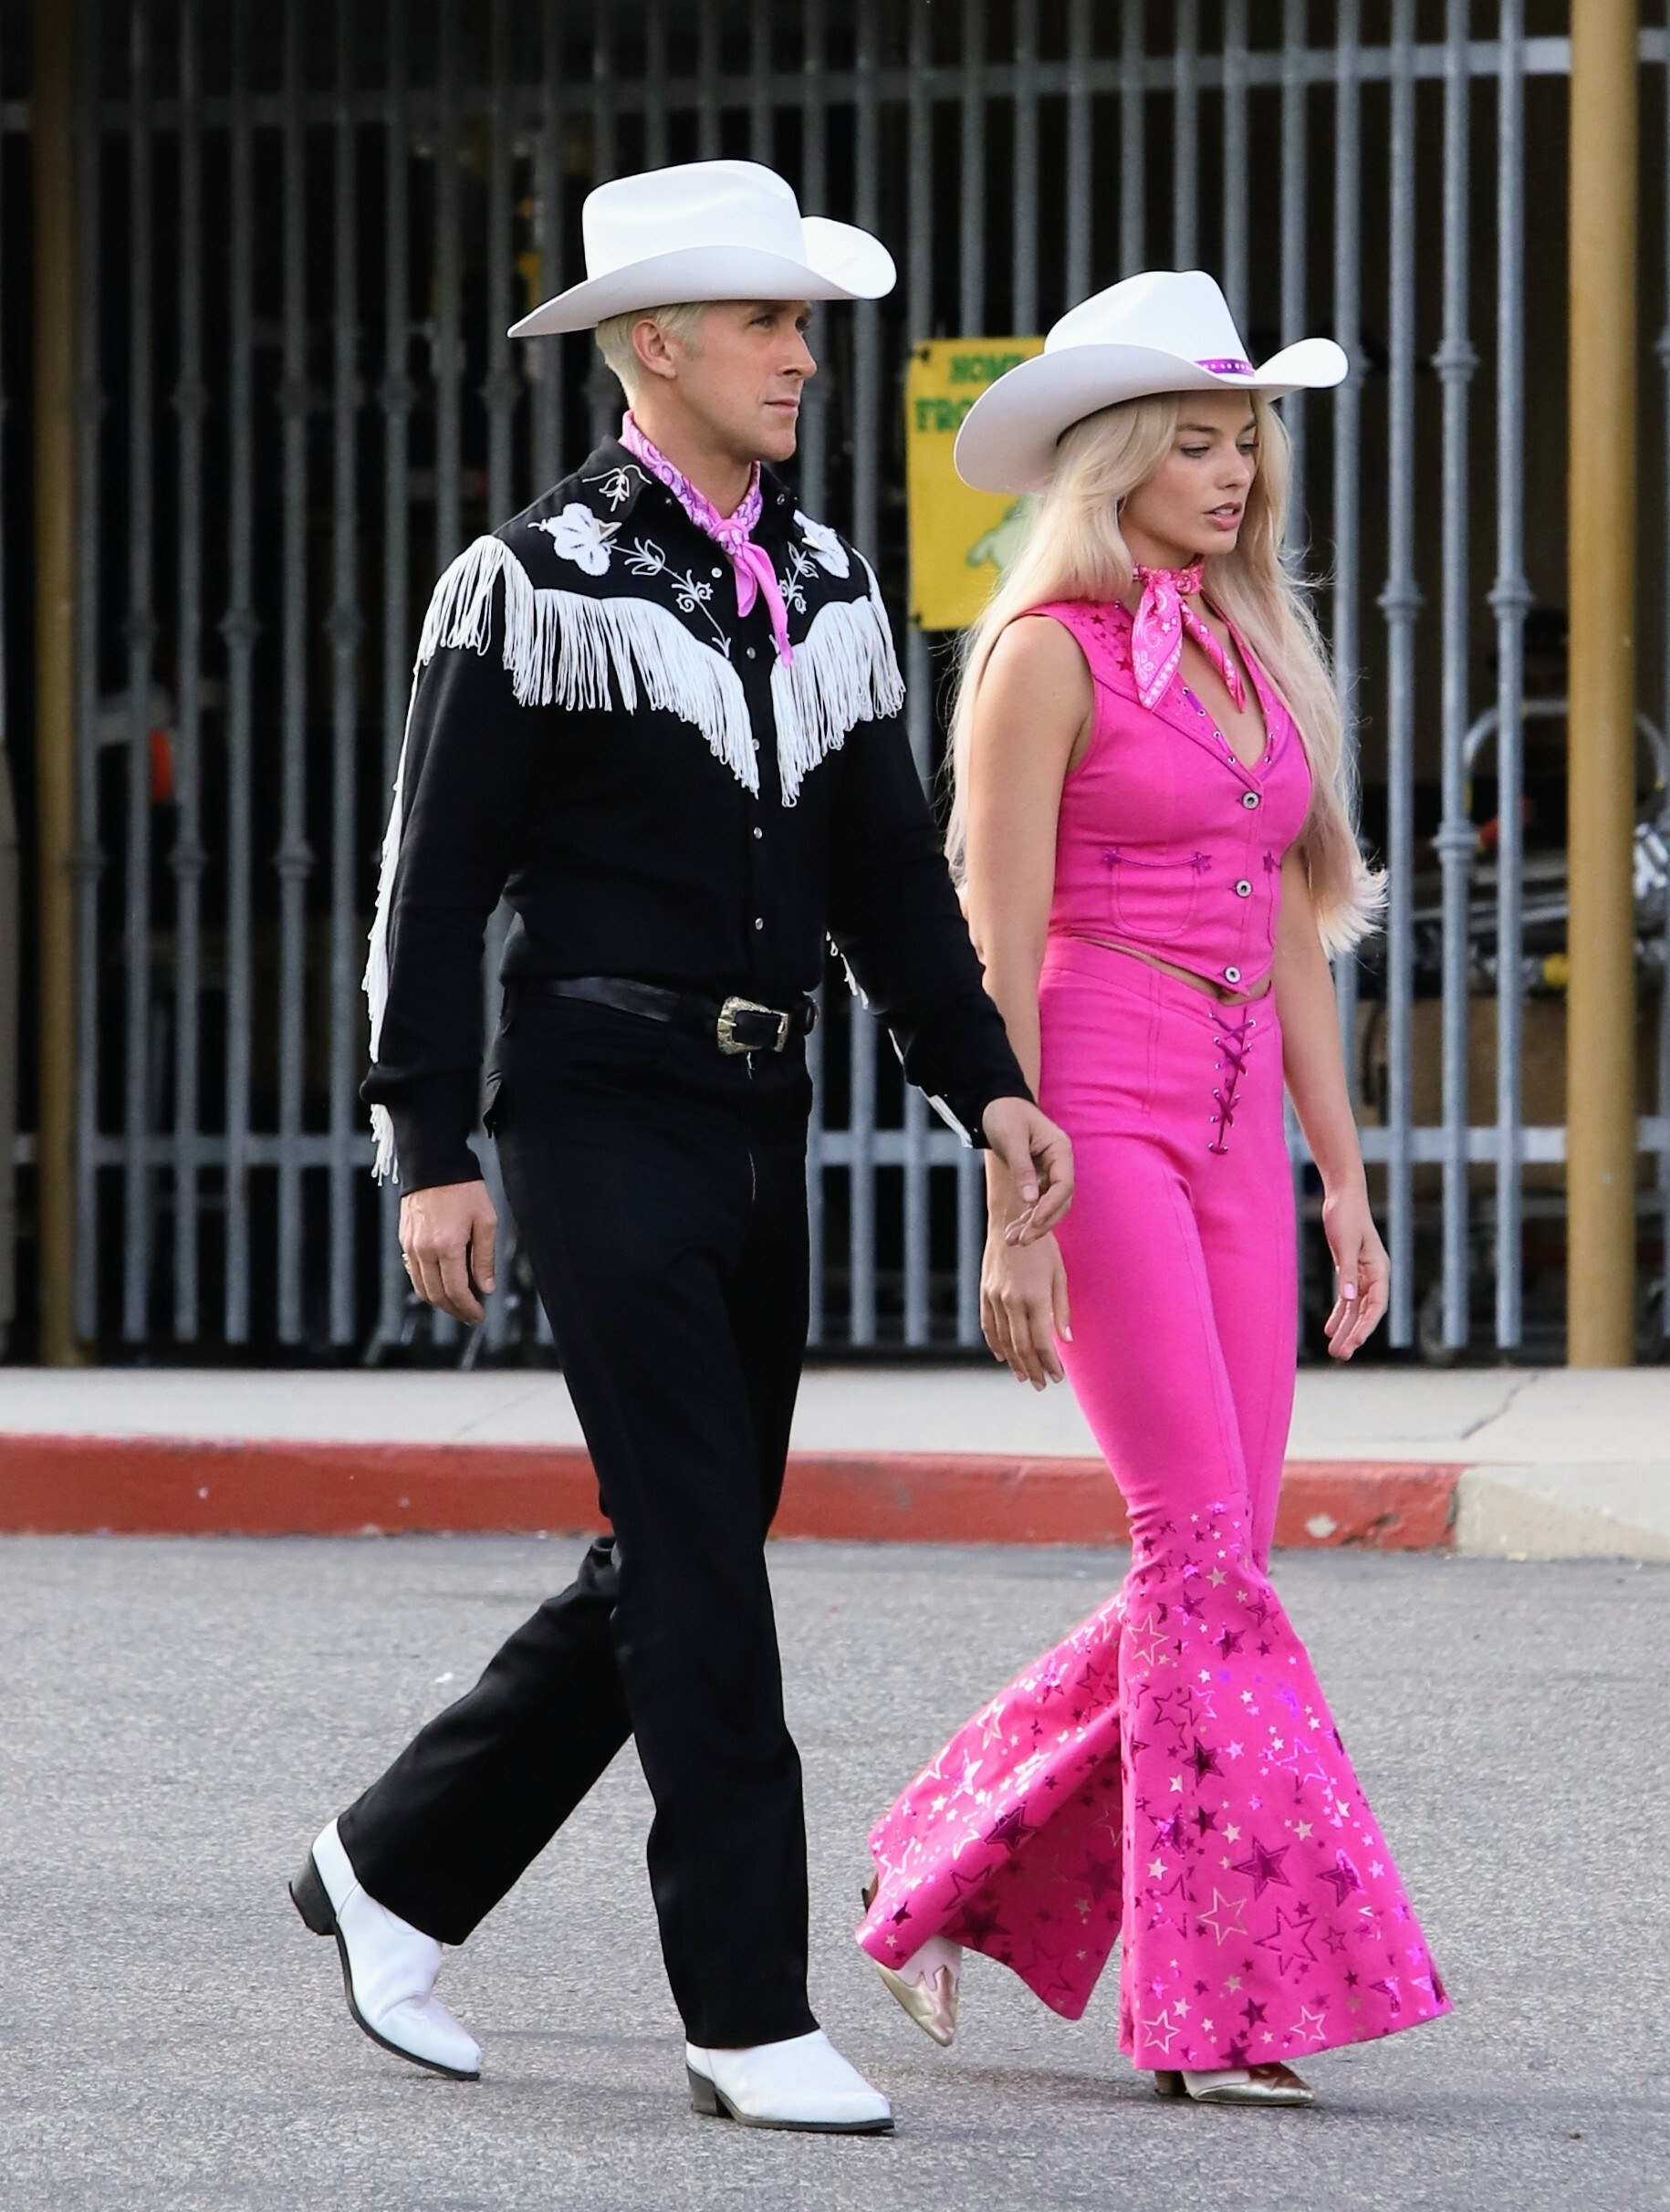 Margot Robbie and Ryan Gosling seen together filming scenes for the new Barbie movie while wearing sexy cowboy costumes